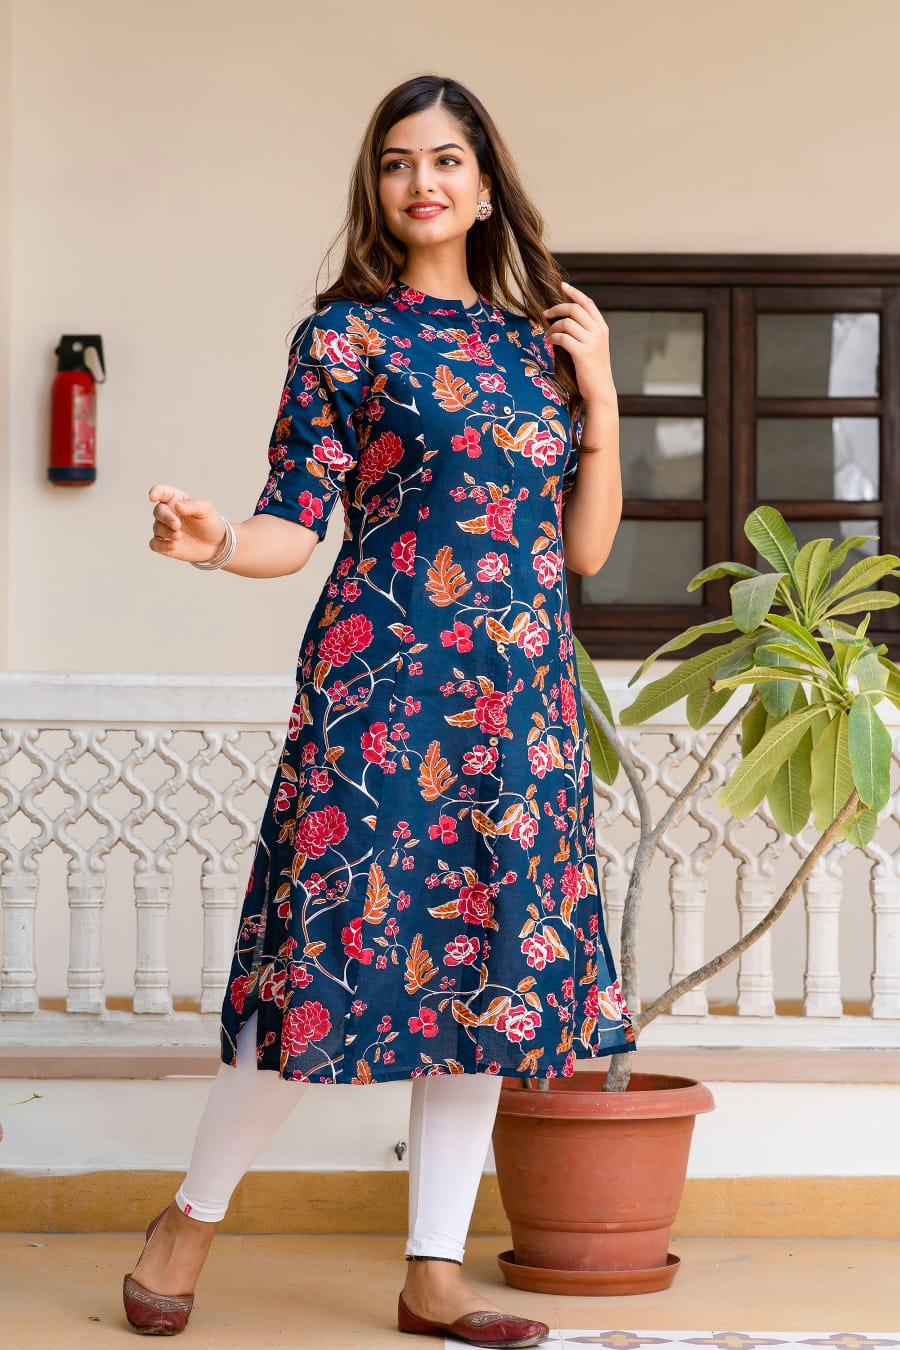 Cotton Reyon Cut classy look Kurti and Pant With Embroidery – ThreadLooms